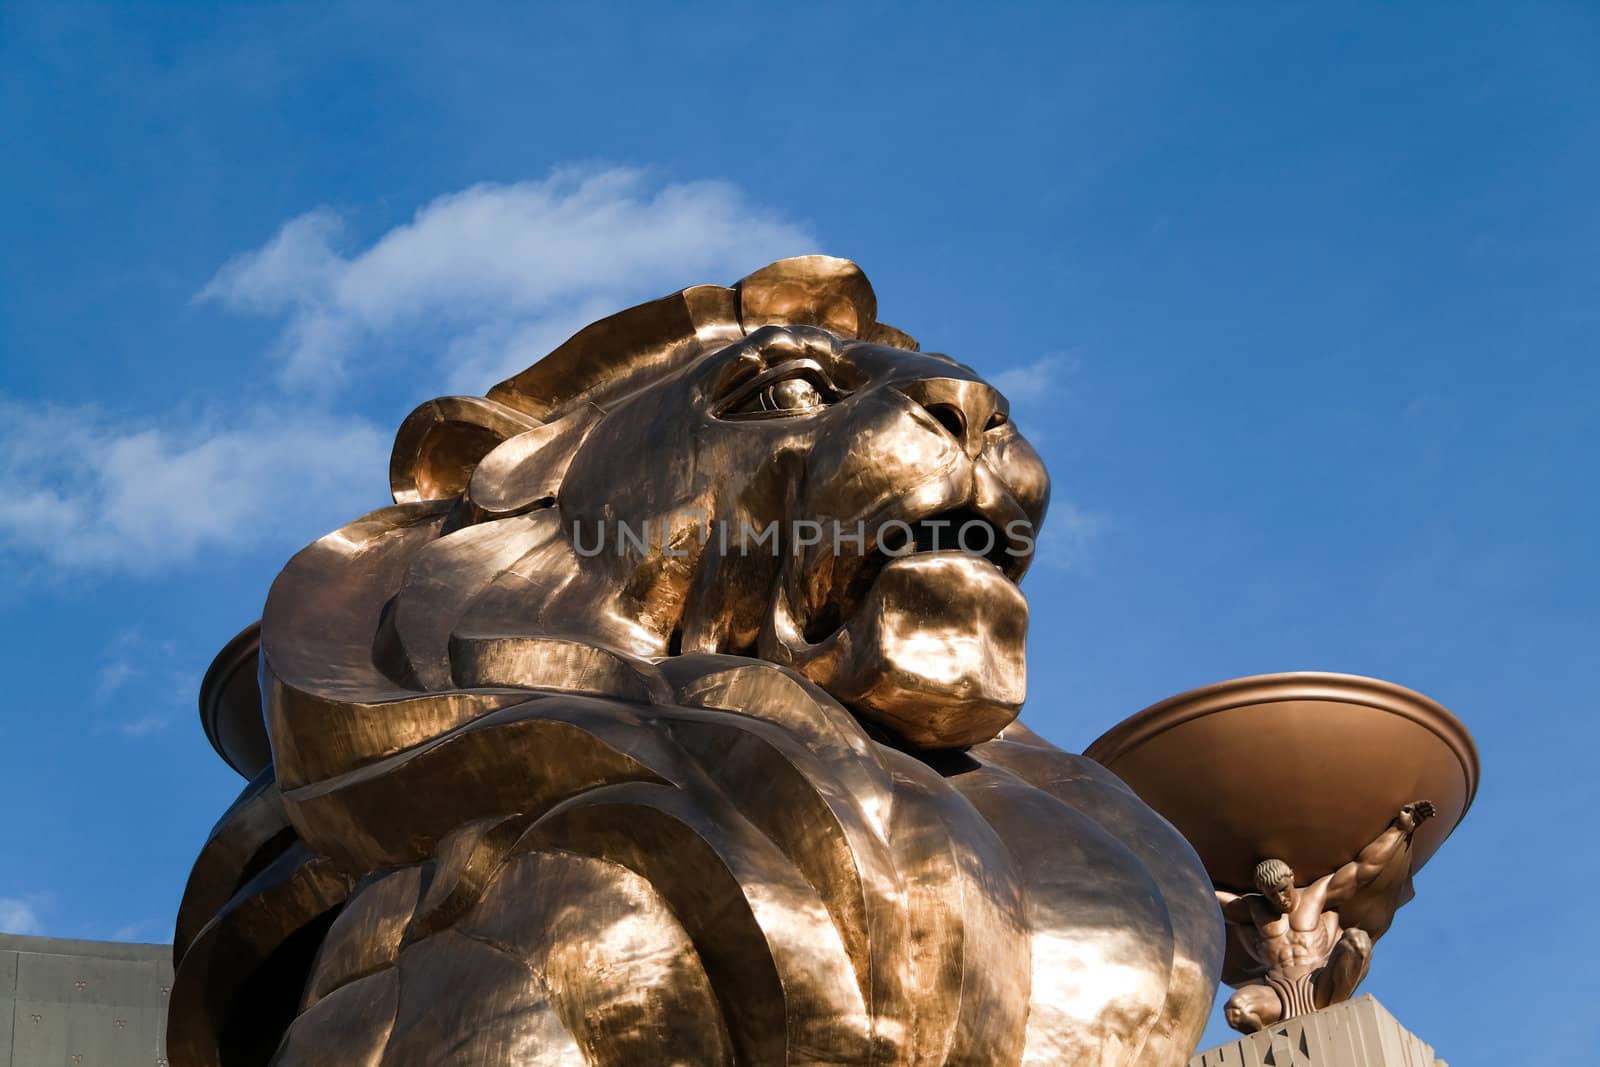 December 30th, 2009 - Las Vegas, Nevada, USA - The MGM Hotel and Casino lions head, which is to bring good luck and is the entrance to the hotel